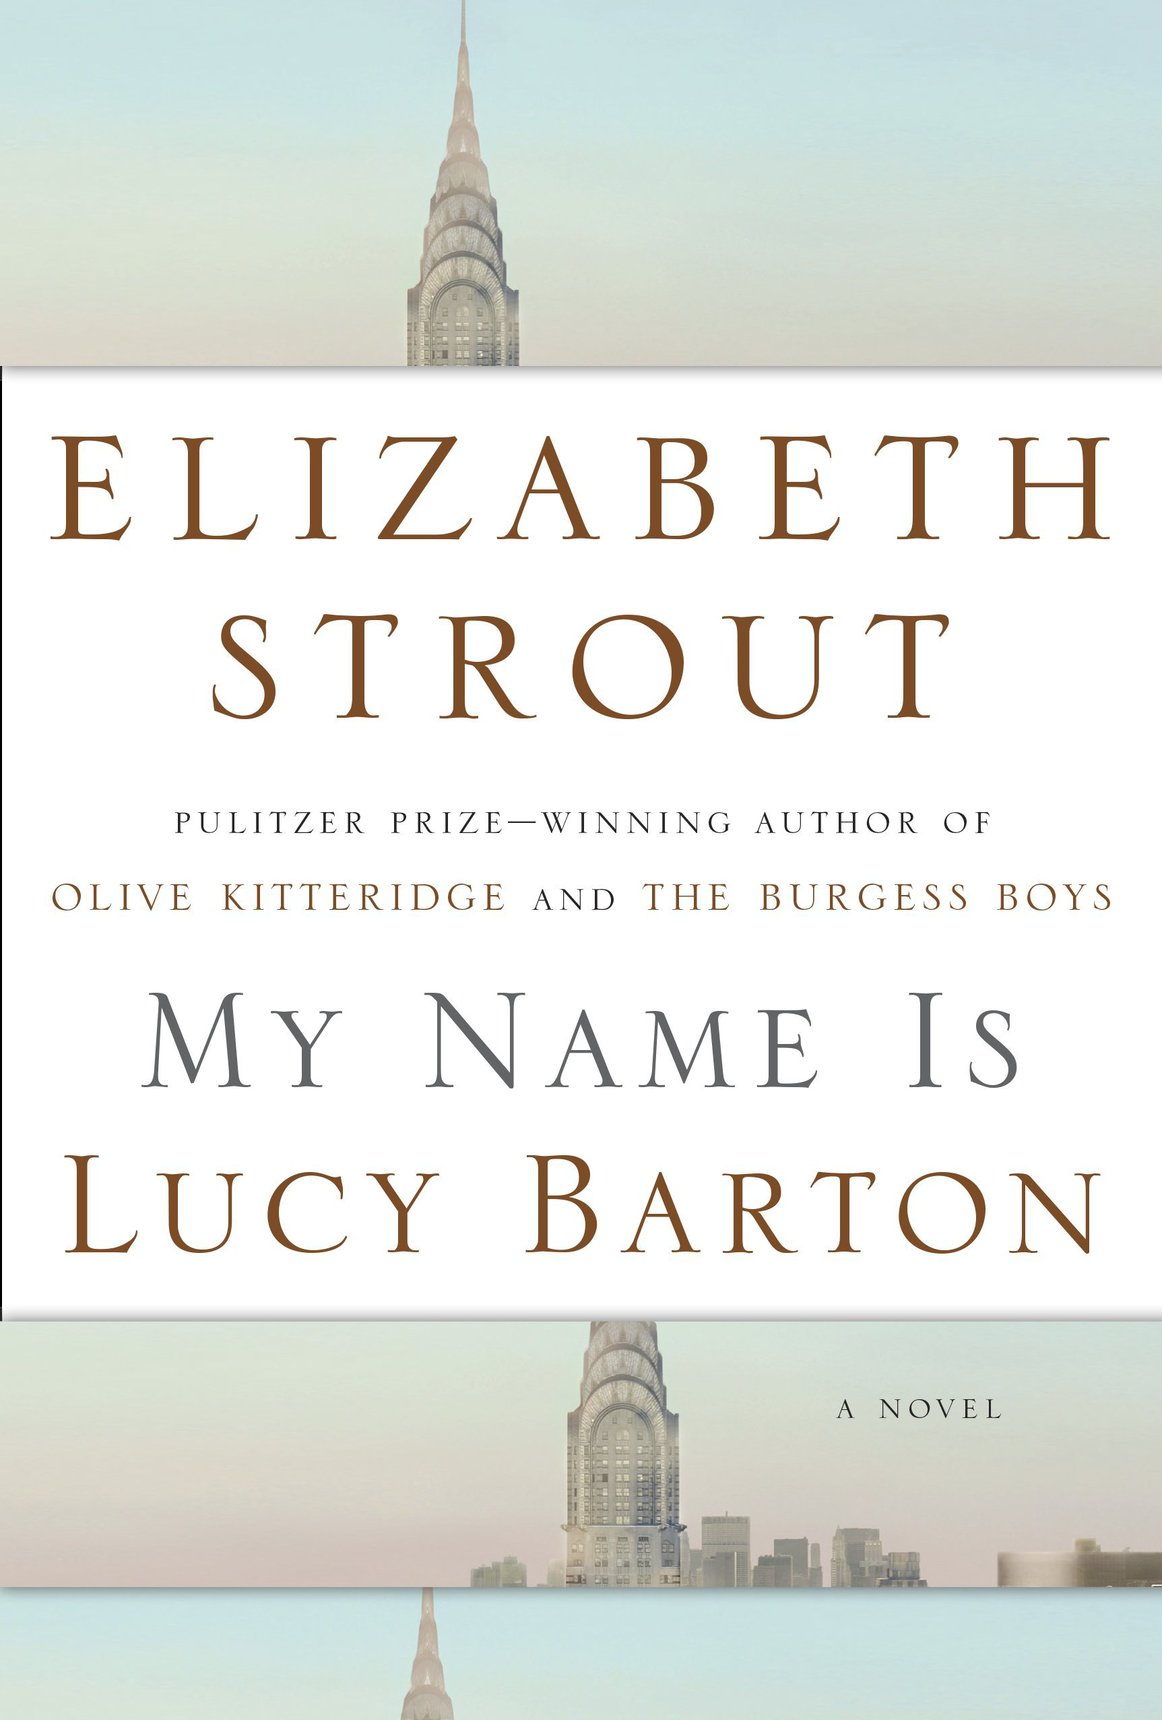 My Name Is Lucy Barton (2016) by Elizabeth Strout